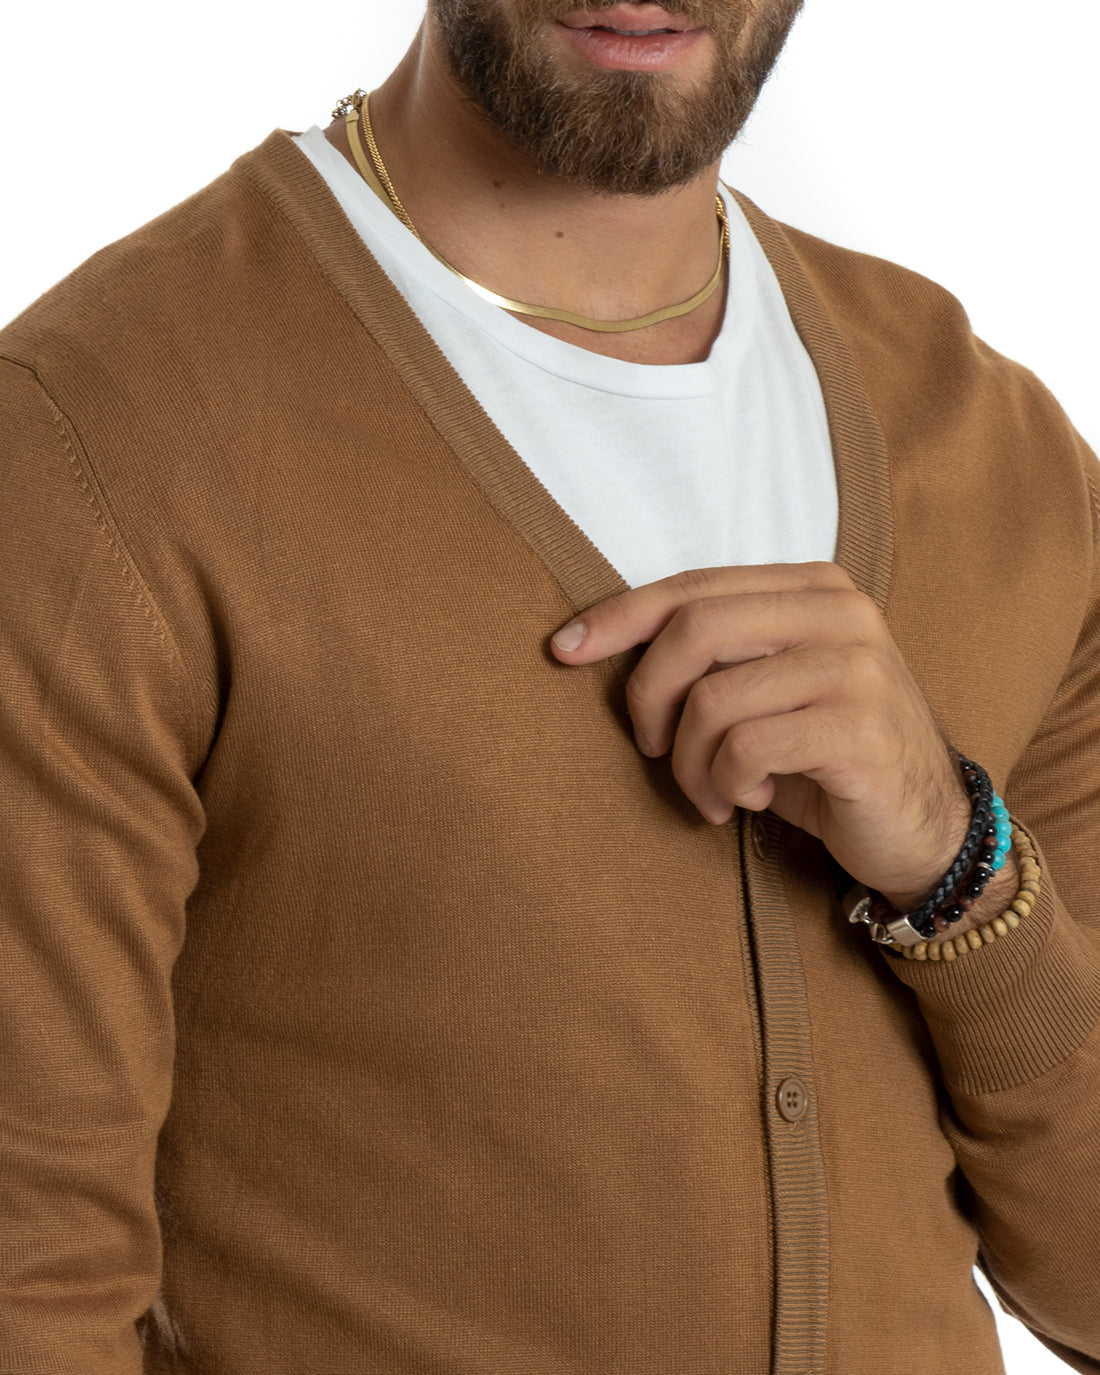 Men's Cardigan Jacket With Buttons V-Neck Sweater English Knit Petrol GIOSAL-M2678A